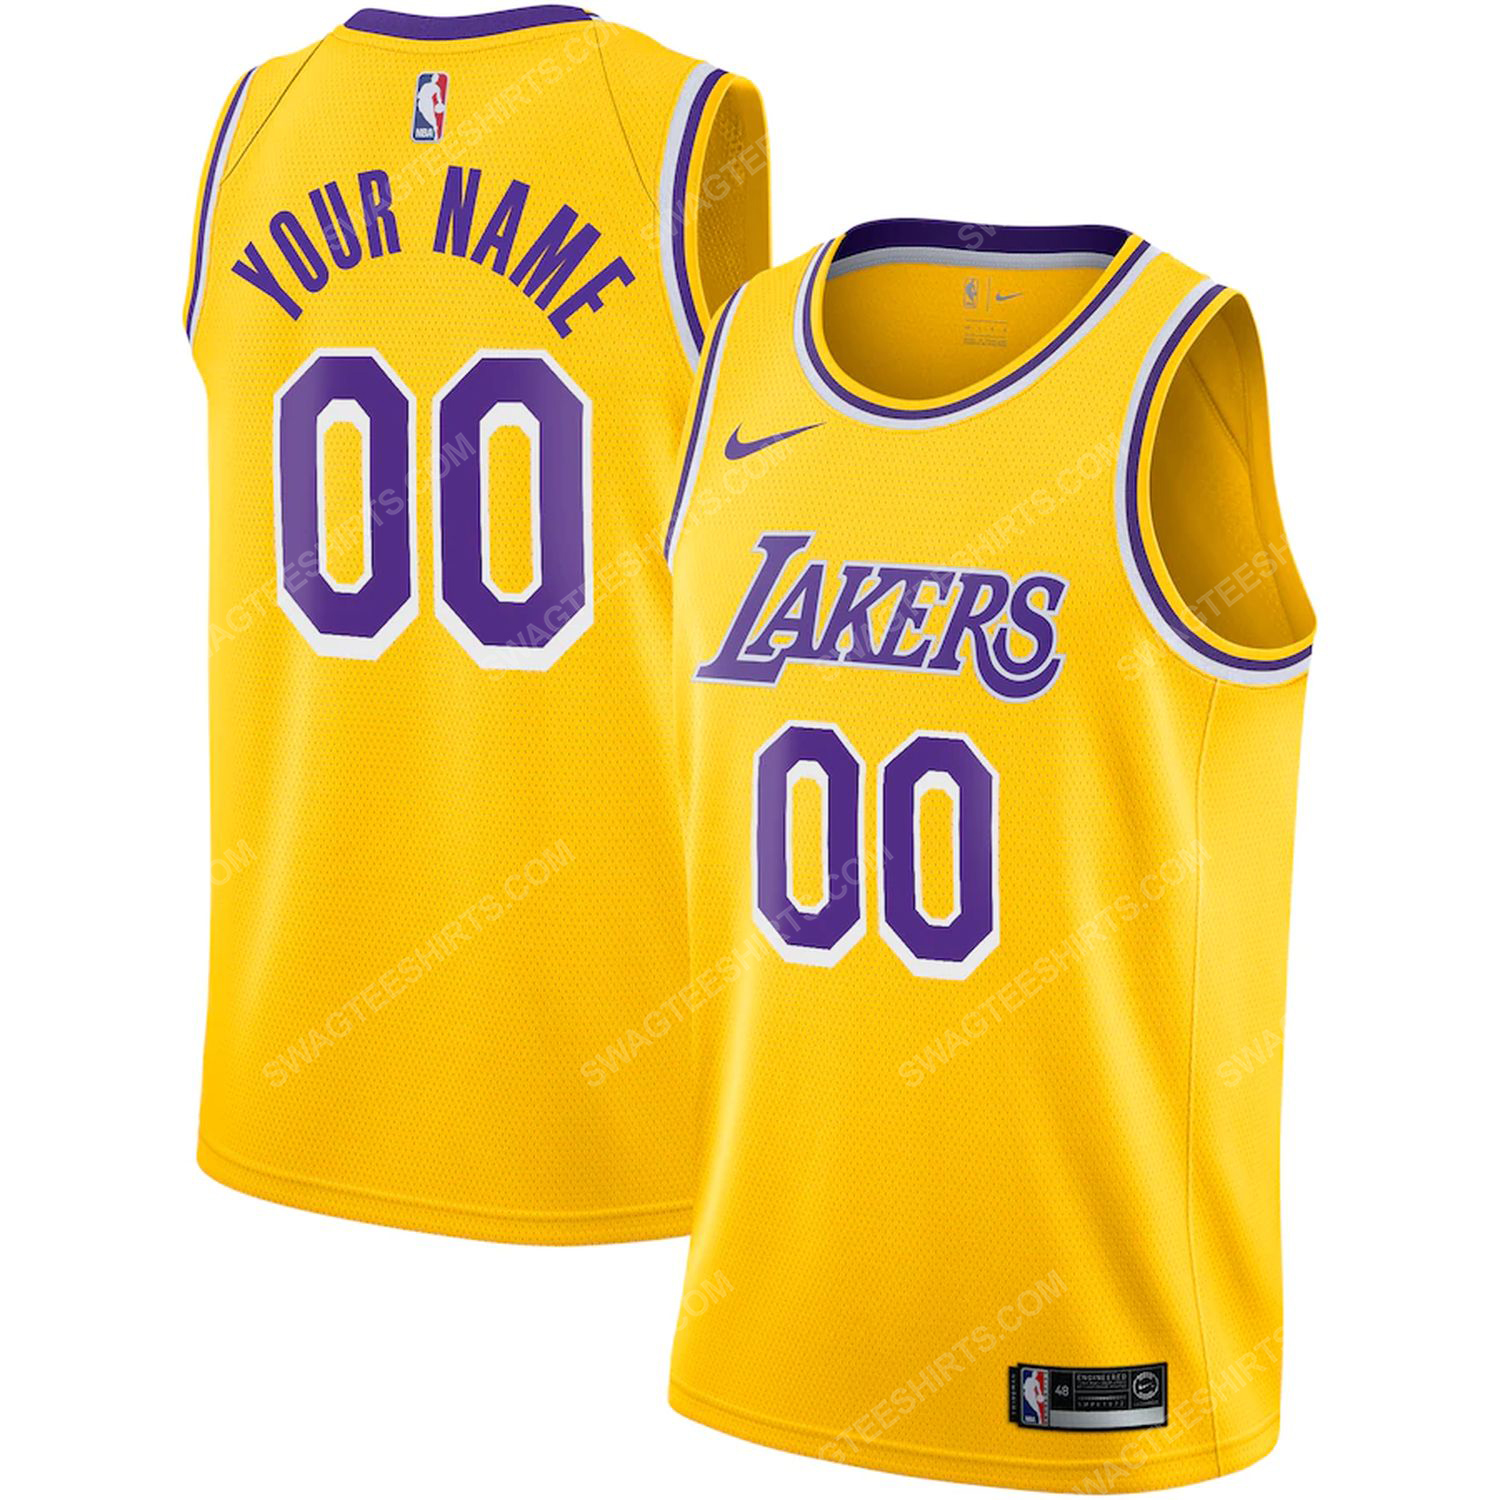 Custom nba los angeles lakers basketball jersey-icon edition- gold - Copy (2)